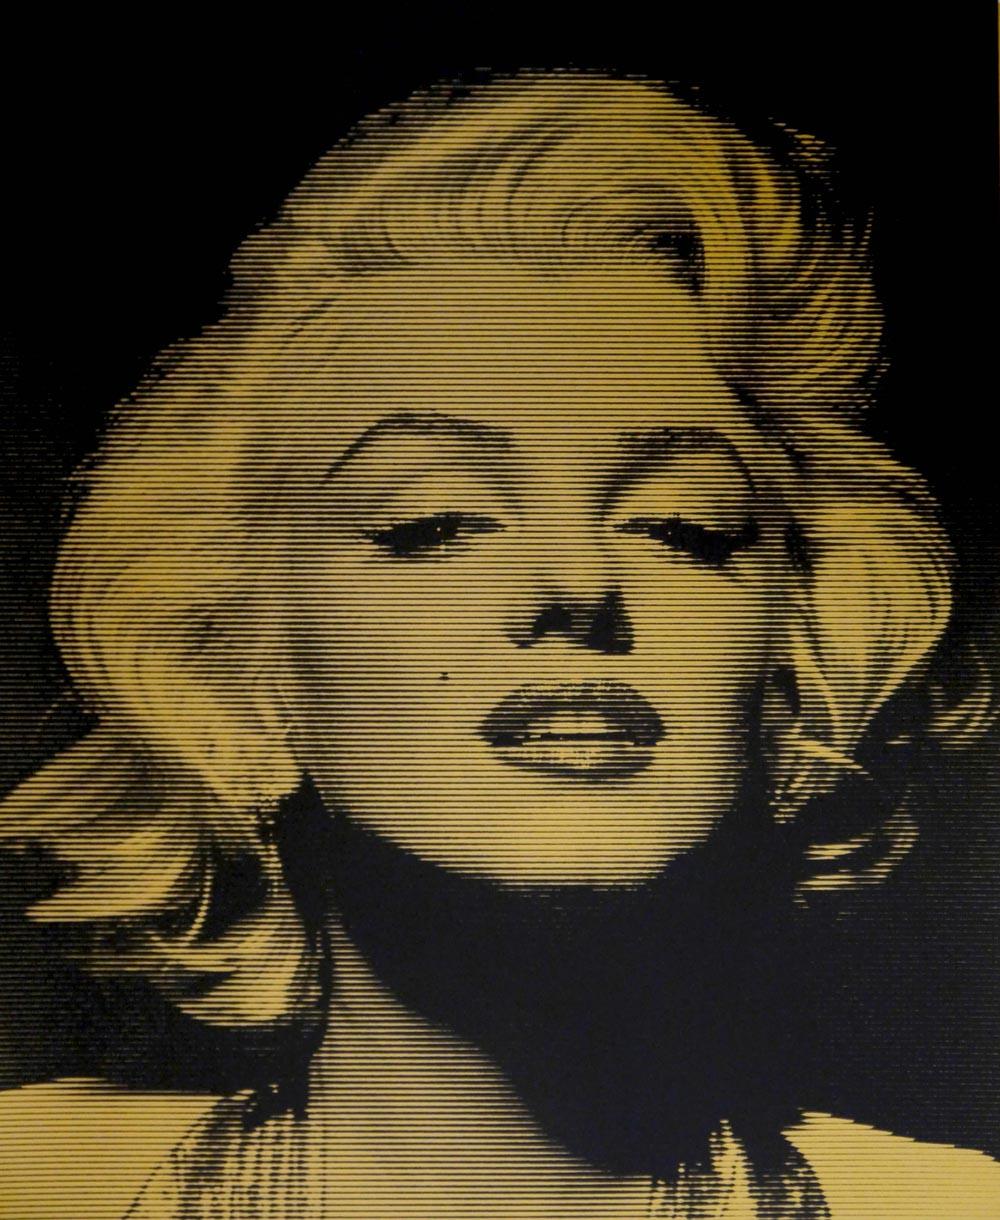 David Studwell Portrait Photograph - Gold Marylin Monroe, limited edition gold Screen print